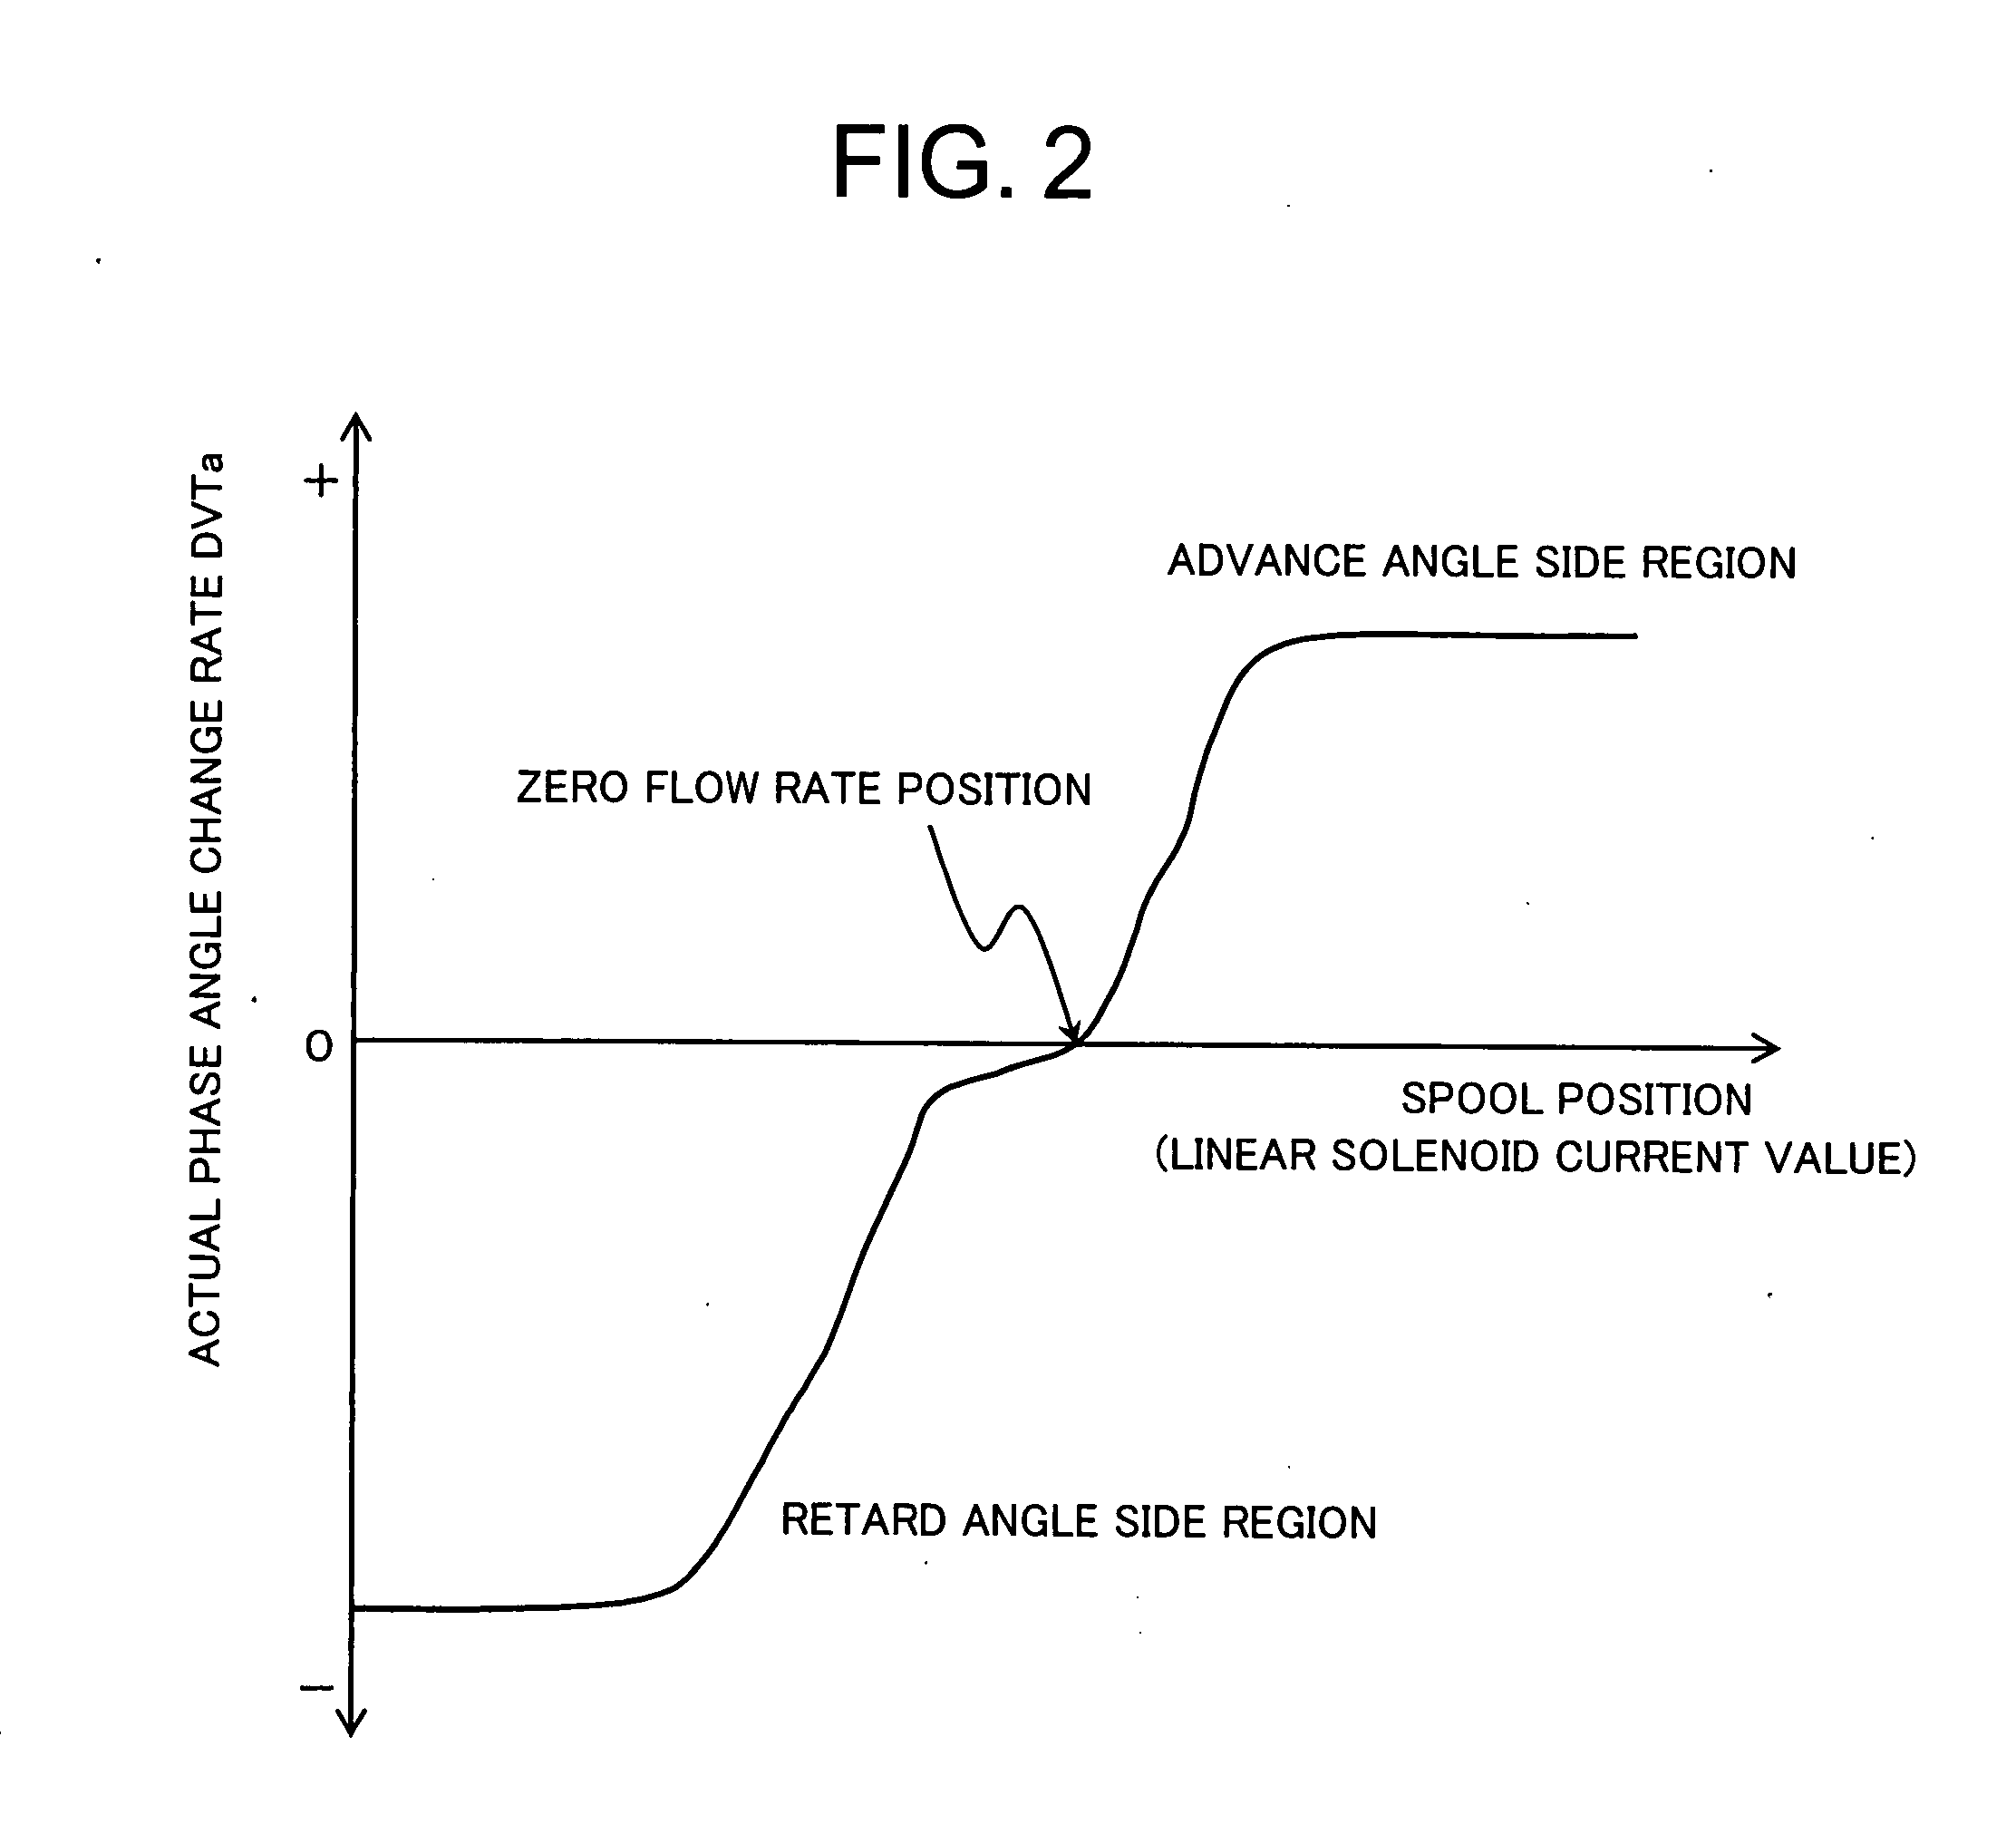 Control apparatus for an internal combustion engine